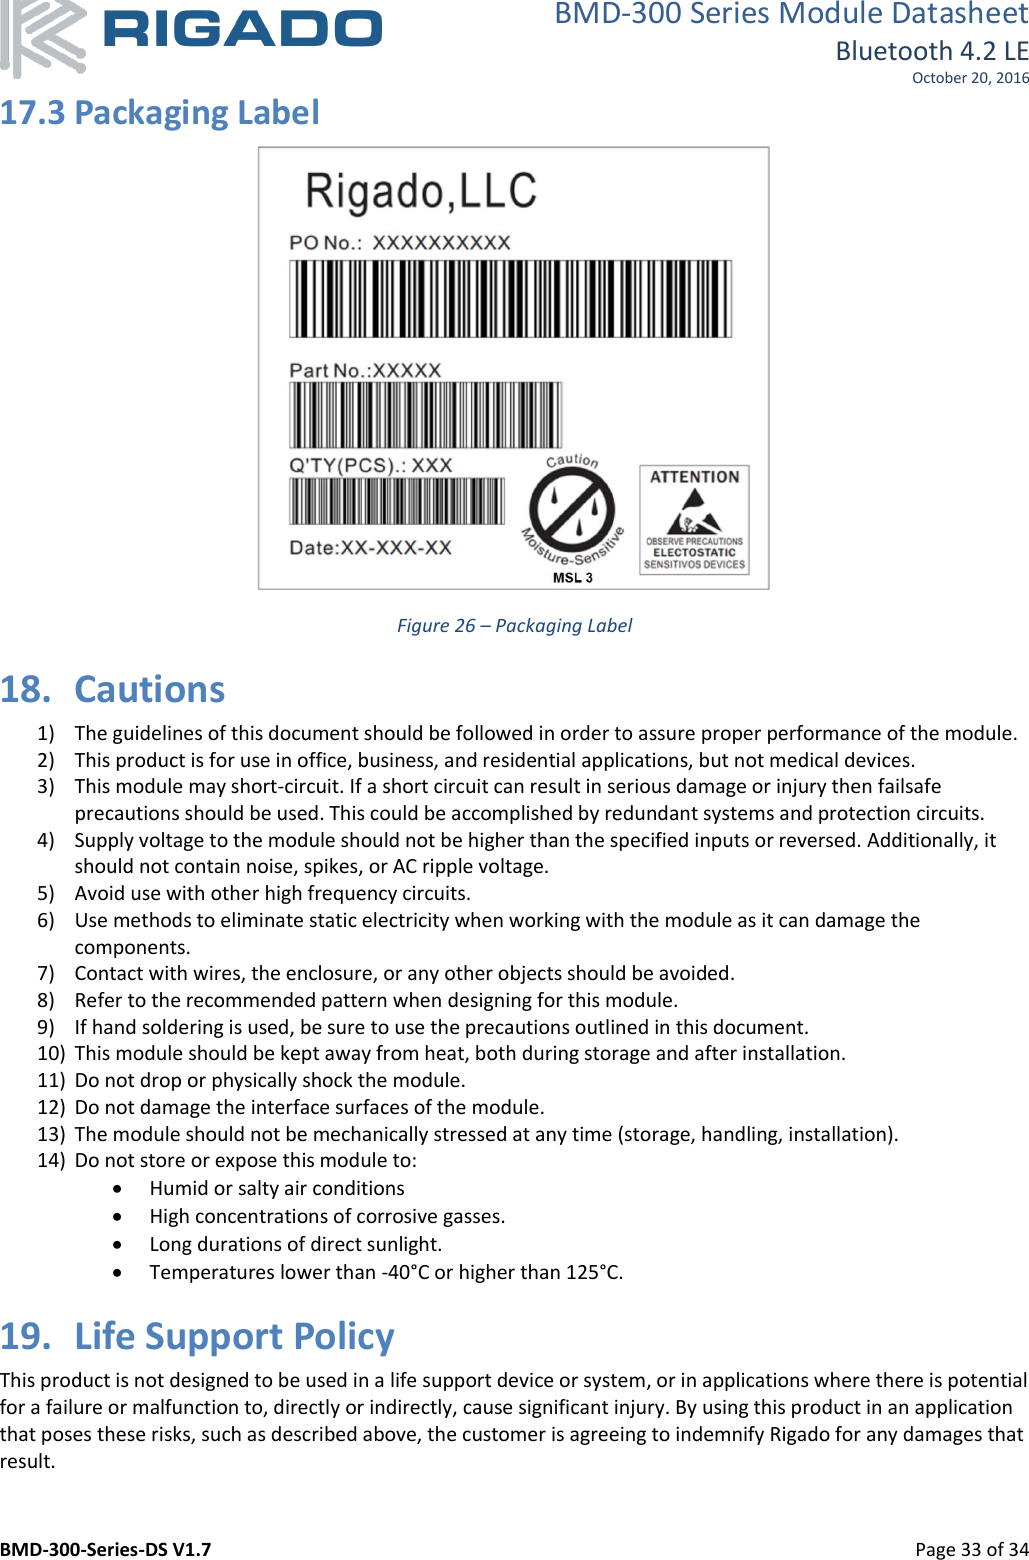 BMD-300 Series Module Datasheet Bluetooth 4.2 LE October 20, 2016 BMD-300-Series-DS V1.7         Page 33 of 34 17.3 Packaging Label  Figure 26 – Packaging Label 18. Cautions 1) The guidelines of this document should be followed in order to assure proper performance of the module. 2) This product is for use in office, business, and residential applications, but not medical devices. 3) This module may short-circuit. If a short circuit can result in serious damage or injury then failsafe precautions should be used. This could be accomplished by redundant systems and protection circuits. 4) Supply voltage to the module should not be higher than the specified inputs or reversed. Additionally, it should not contain noise, spikes, or AC ripple voltage. 5) Avoid use with other high frequency circuits. 6) Use methods to eliminate static electricity when working with the module as it can damage the components. 7) Contact with wires, the enclosure, or any other objects should be avoided. 8) Refer to the recommended pattern when designing for this module. 9) If hand soldering is used, be sure to use the precautions outlined in this document. 10) This module should be kept away from heat, both during storage and after installation. 11) Do not drop or physically shock the module. 12) Do not damage the interface surfaces of the module. 13) The module should not be mechanically stressed at any time (storage, handling, installation). 14) Do not store or expose this module to:  Humid or salty air conditions  High concentrations of corrosive gasses.  Long durations of direct sunlight.  Temperatures lower than -40°C or higher than 125°C. 19. Life Support Policy This product is not designed to be used in a life support device or system, or in applications where there is potential for a failure or malfunction to, directly or indirectly, cause significant injury. By using this product in an application that poses these risks, such as described above, the customer is agreeing to indemnify Rigado for any damages that result.  